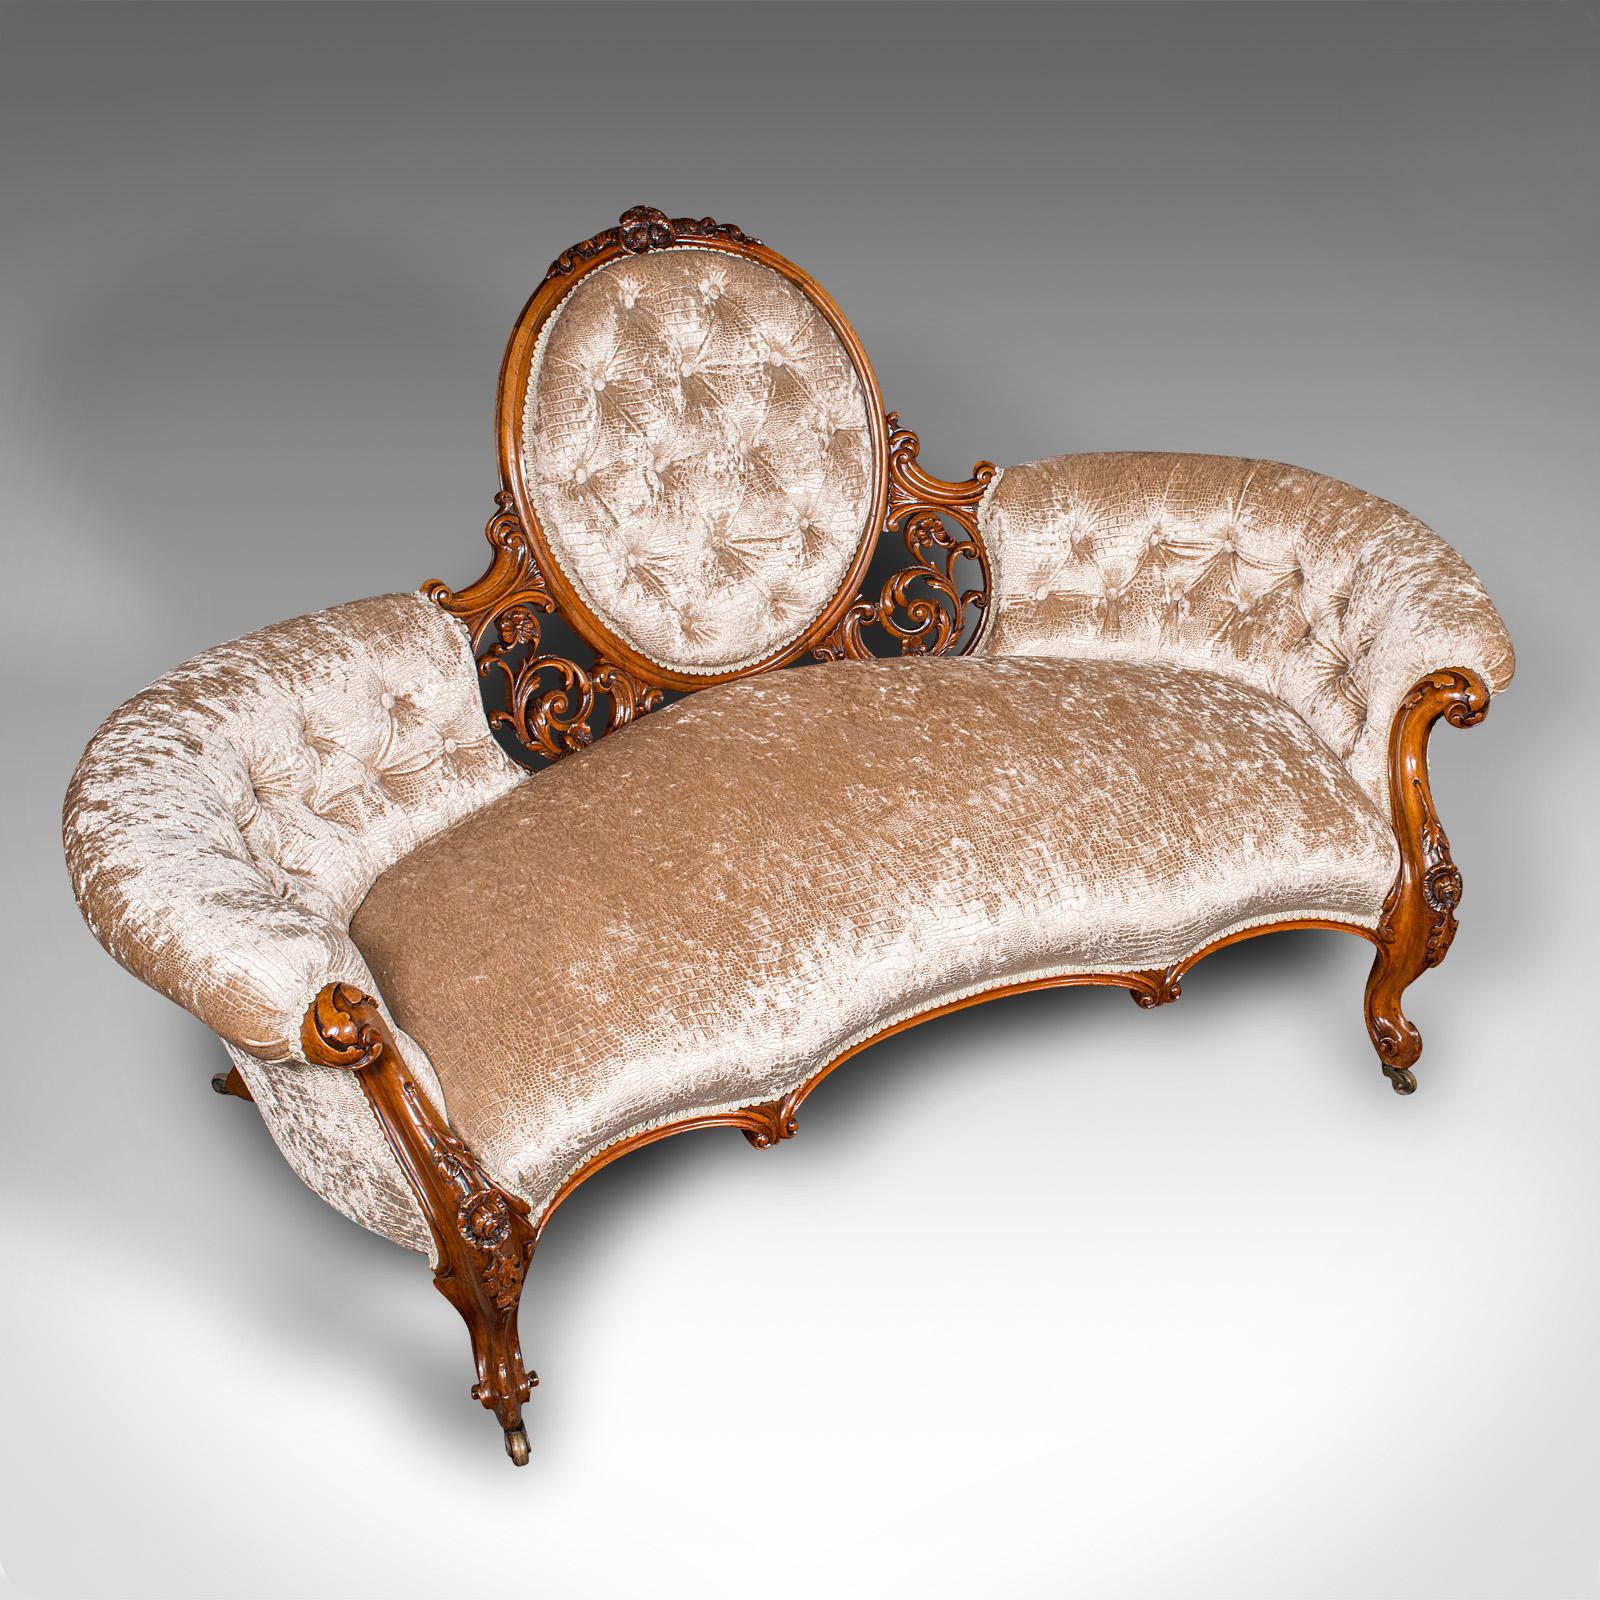 19th Century Antique Carved Spoon Back Settee, English, Walnut, Showpiece Sofa, Victorian For Sale